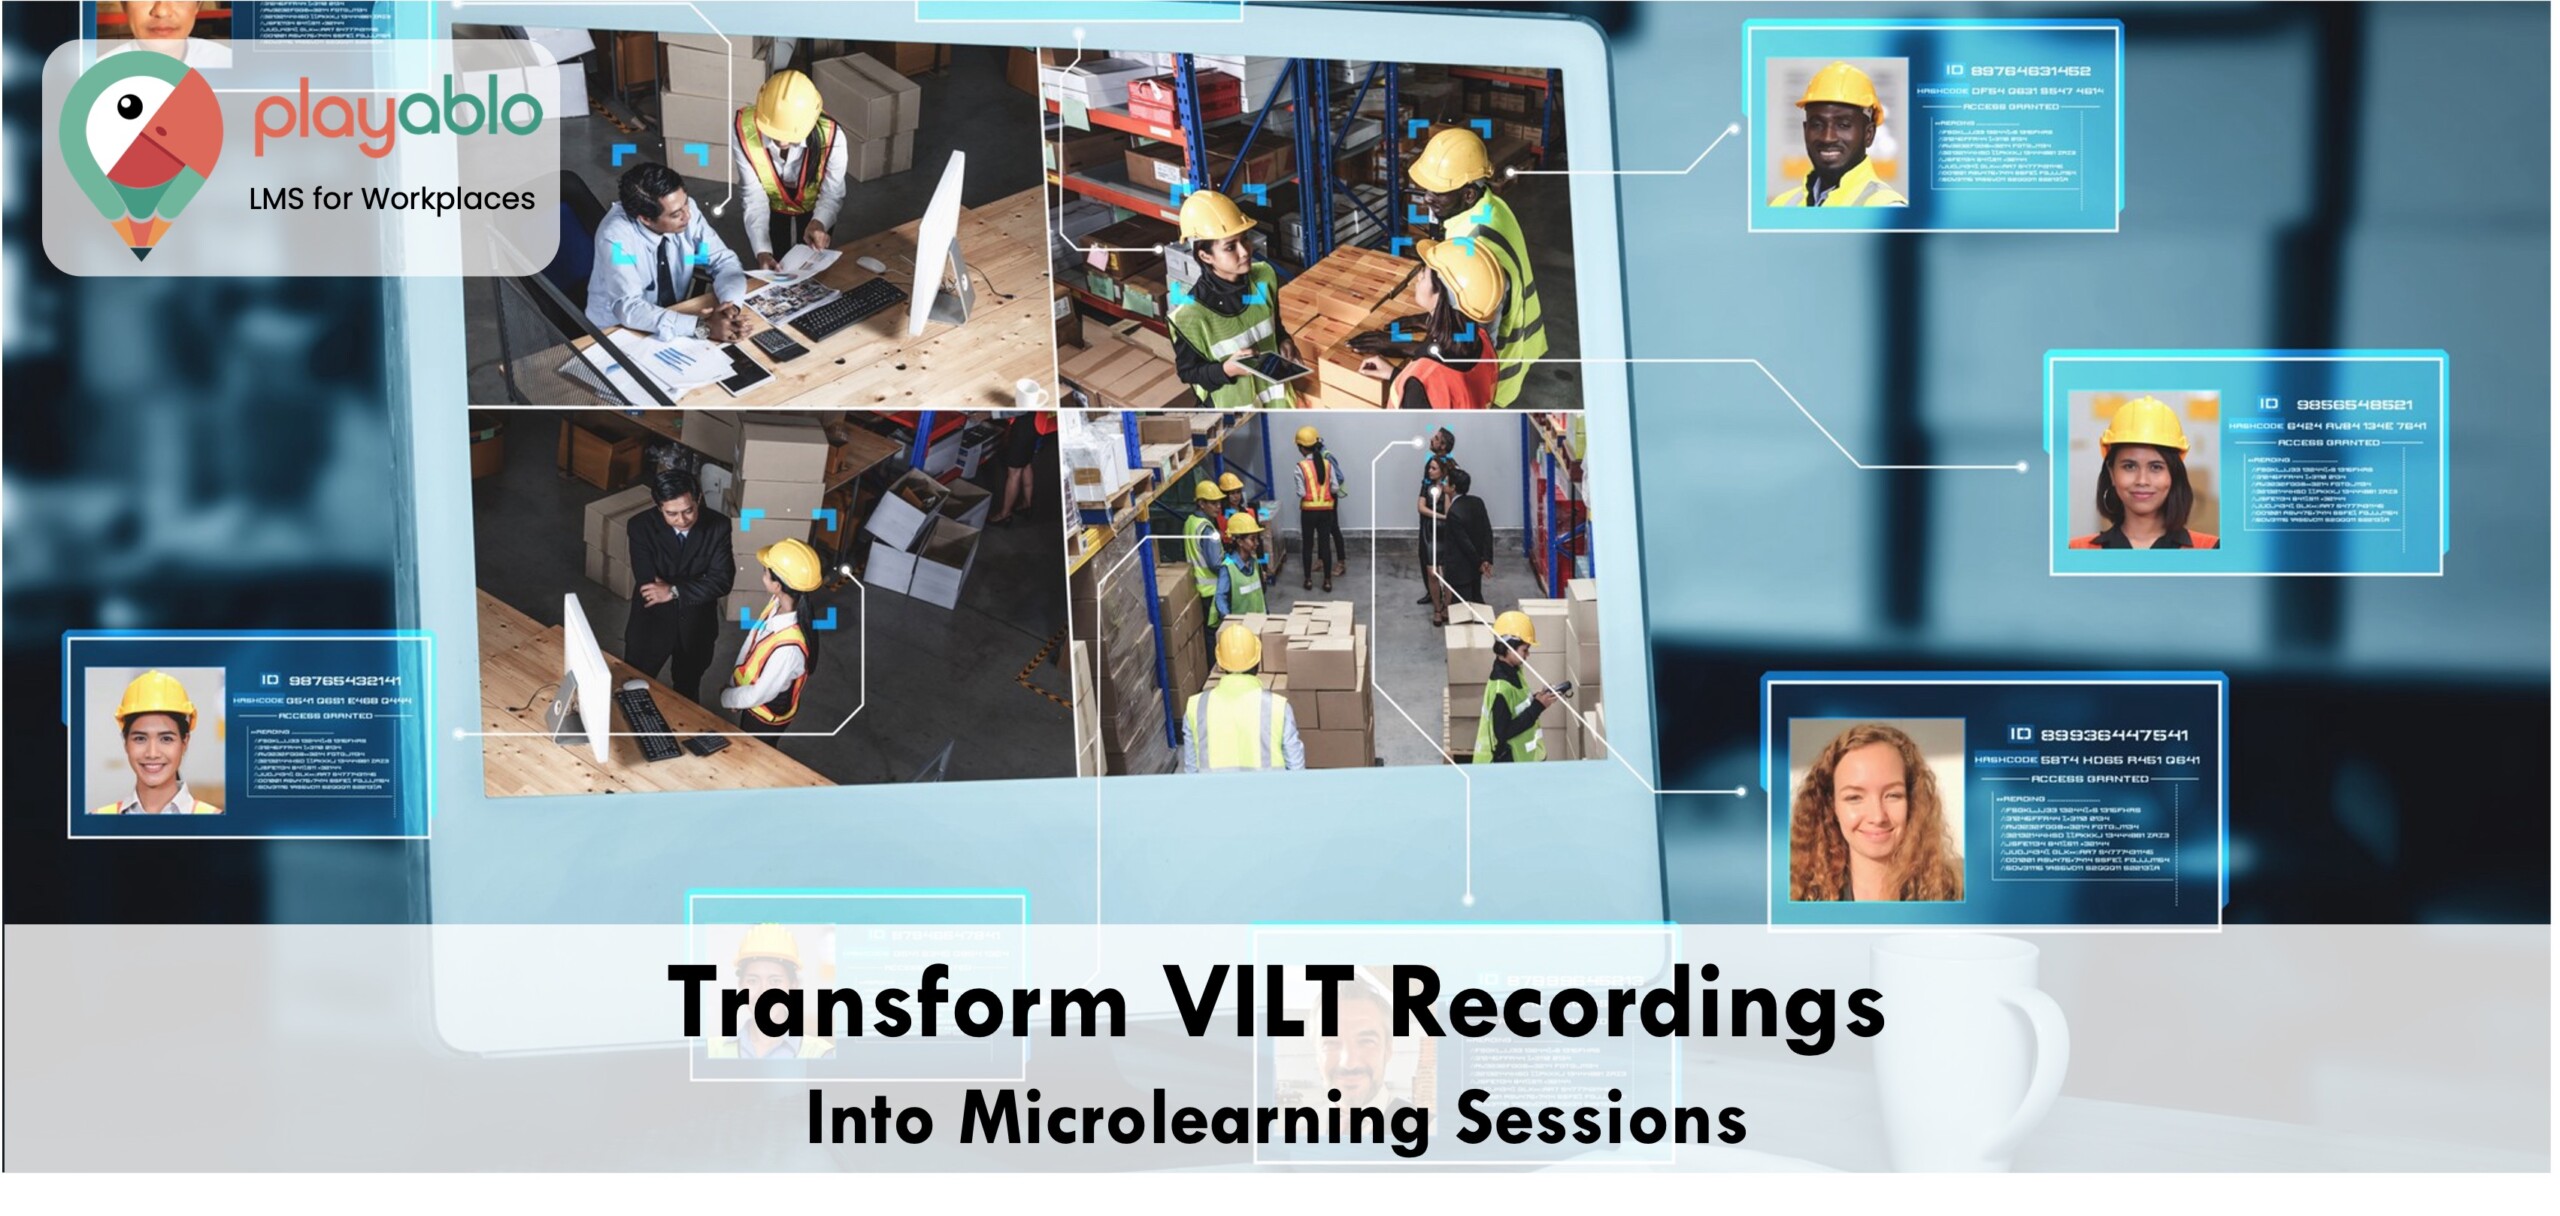 Transforrm-VILT-Recordings-Into-Microlearning-Sessions